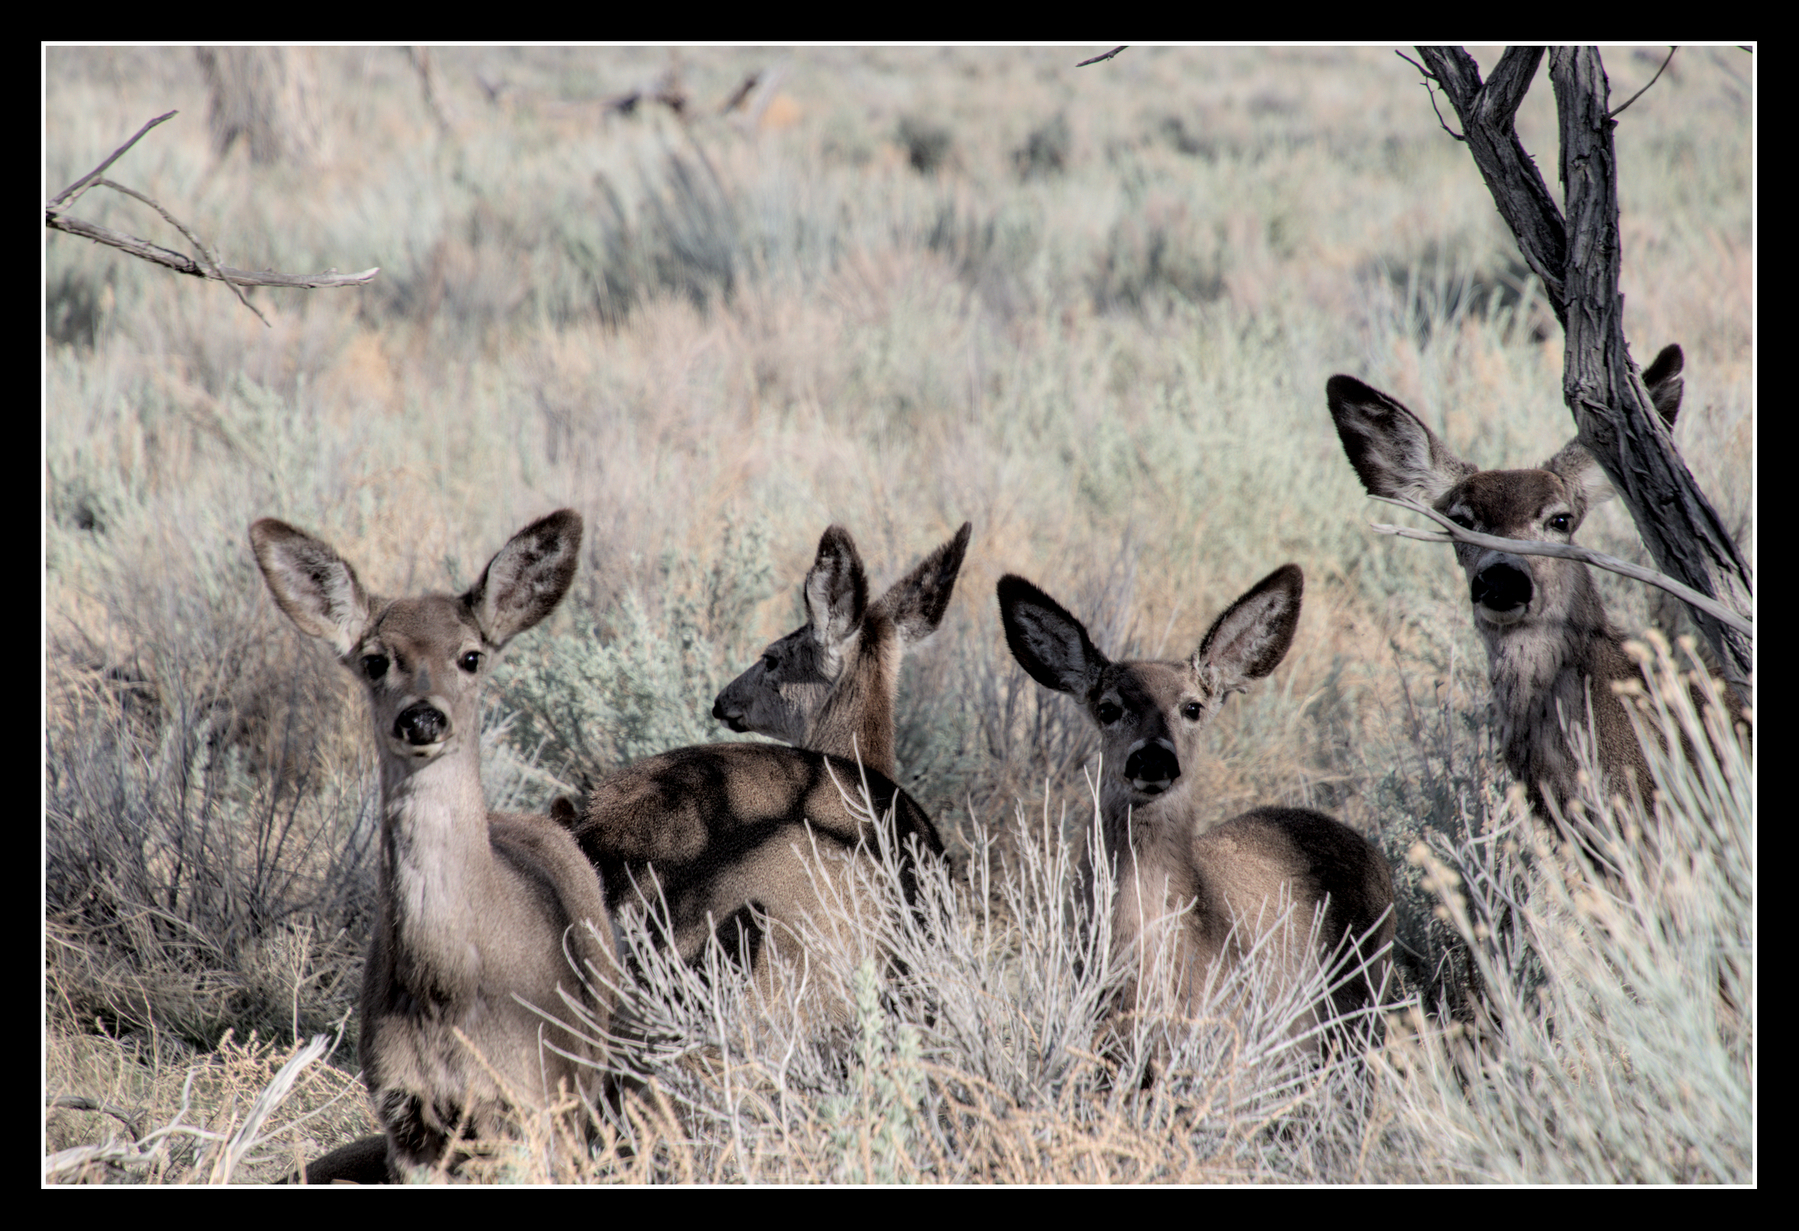 Three more mule deer join the doe protectively, glaring at the camera.